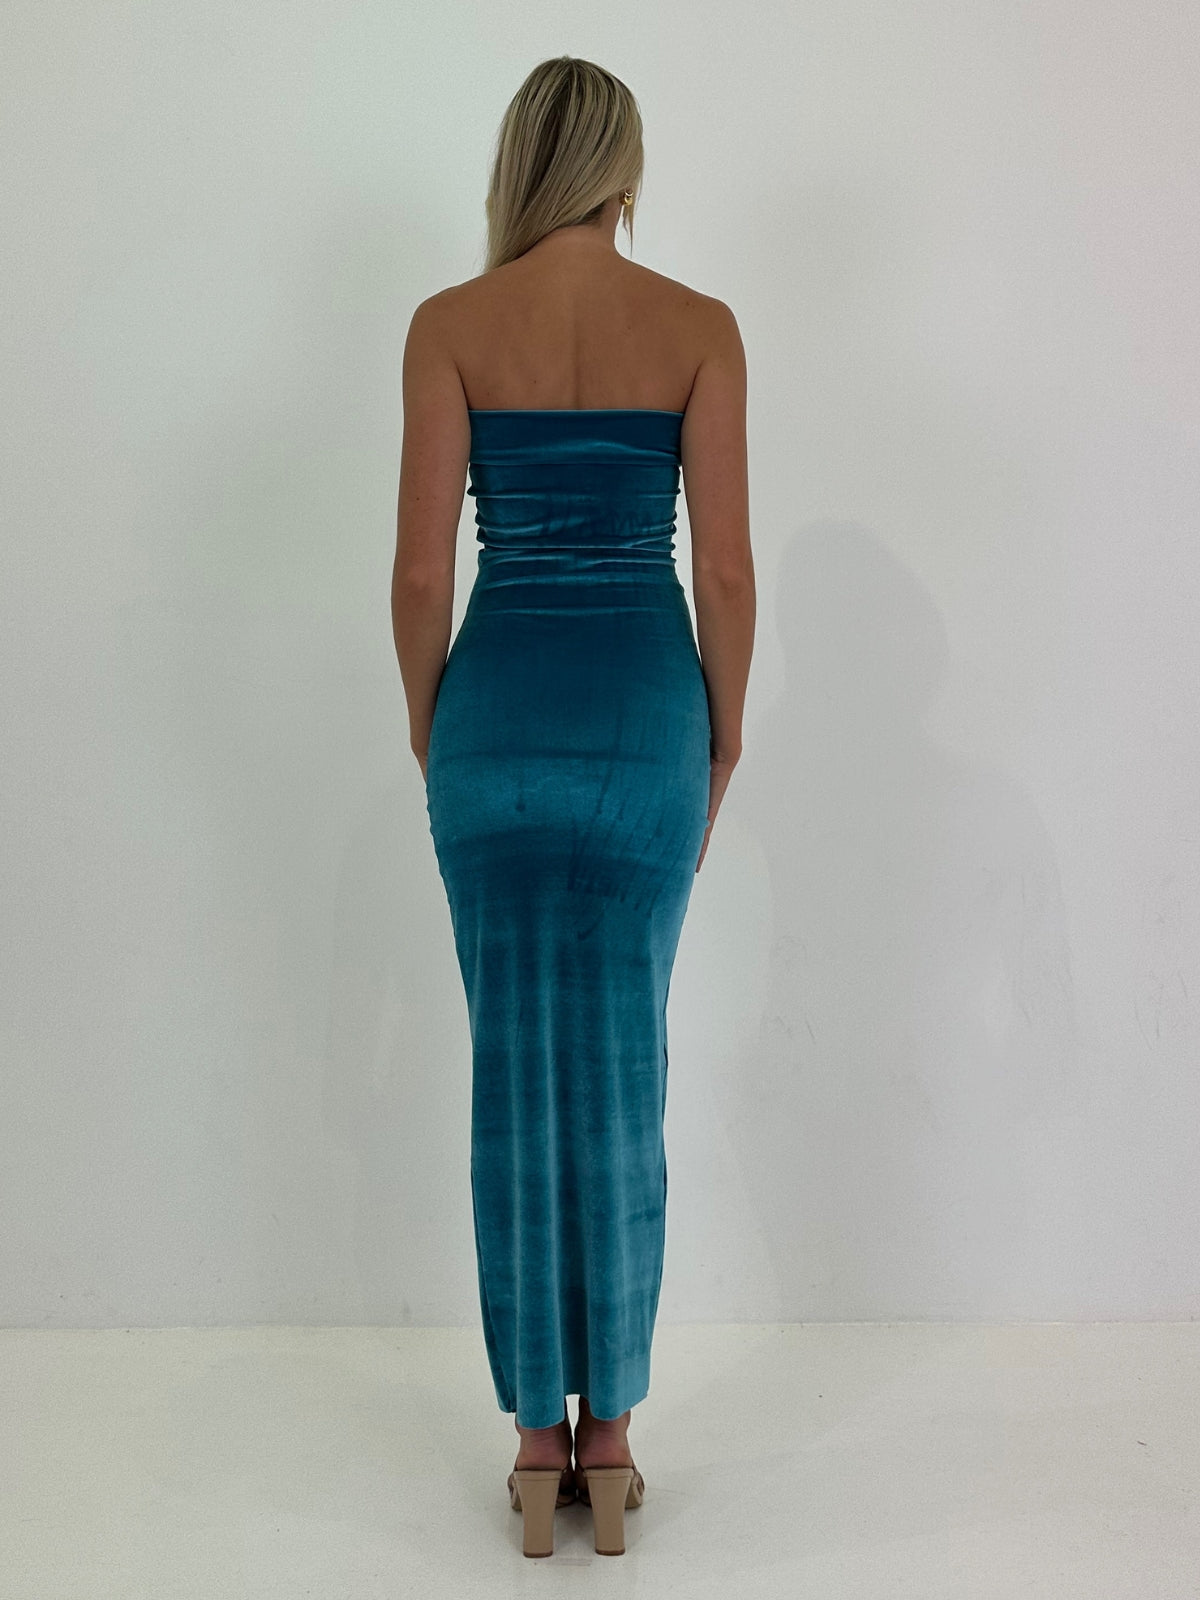 7th & York | Camryn Gown - Teal | Loan That Label